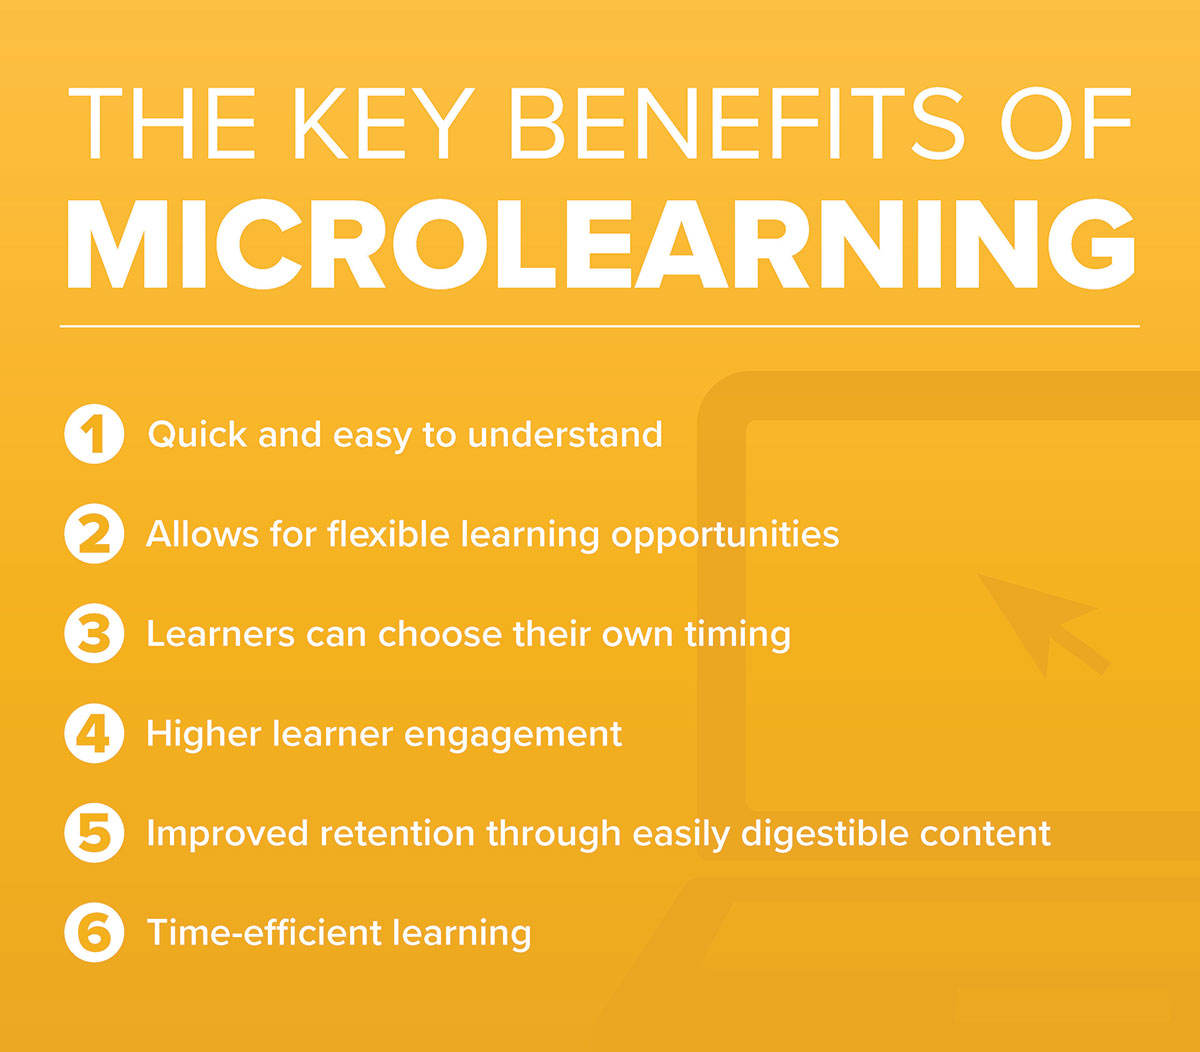 1. Quick and easy to understand | 2. Allows for flexible learning opportunities | 3. Learners can choose their own timing | 4. Higher learner engagement | 5. Improved retention through easily digestible content | 6. Time-efficient learning